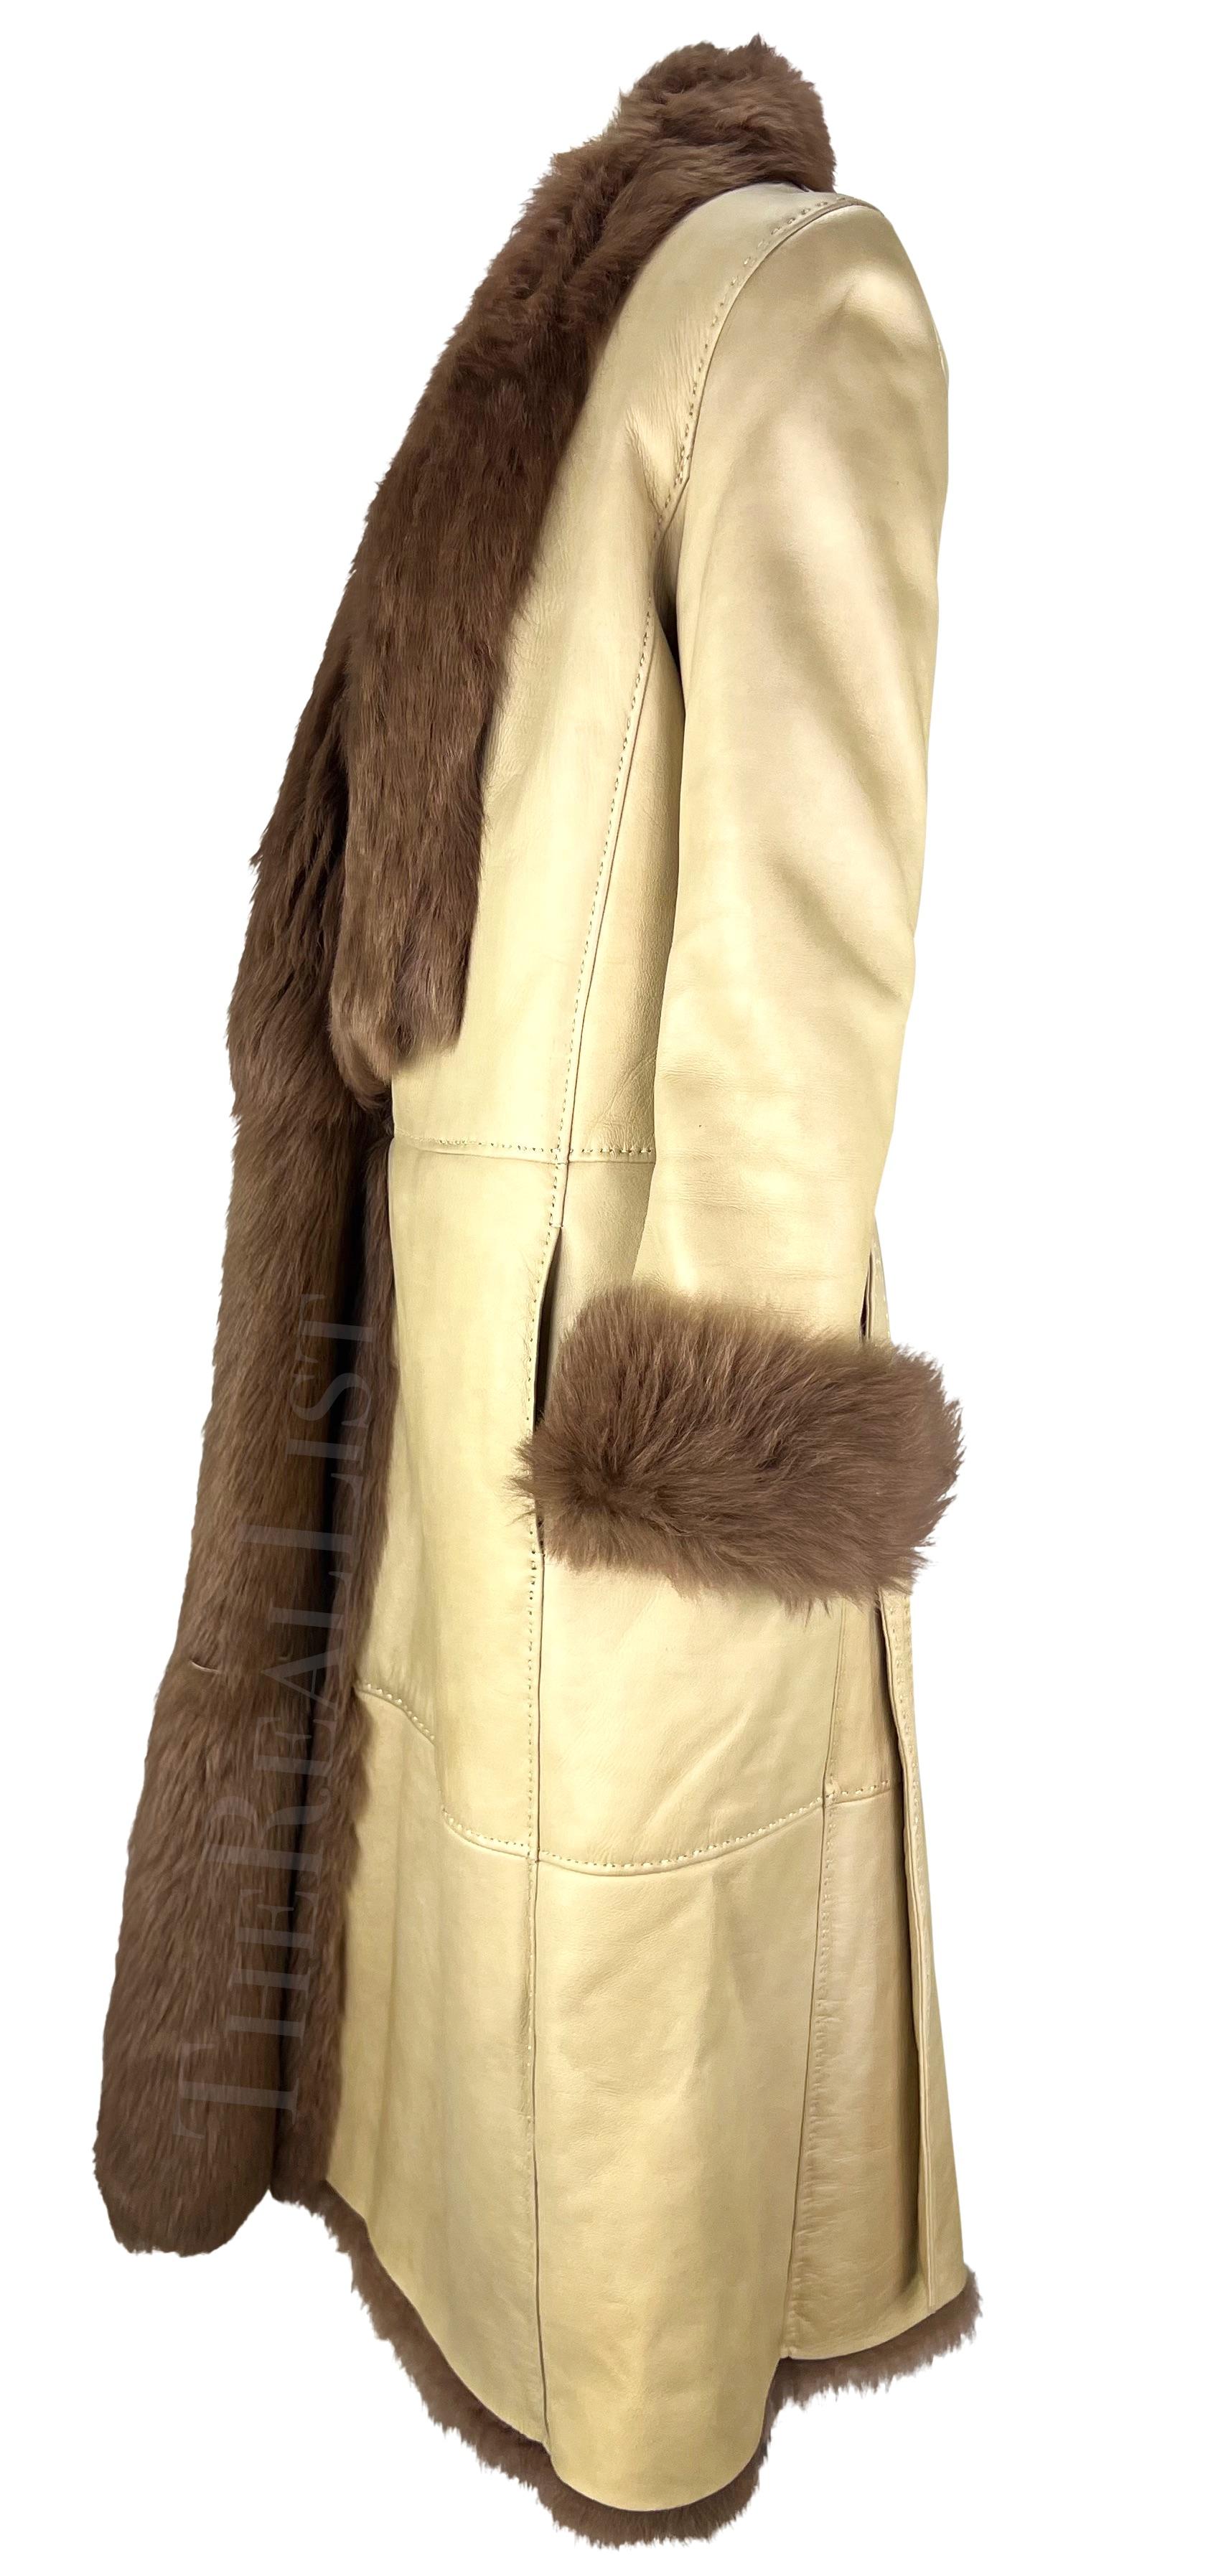 F/W 2000 Gianni Versace by Donatella Runway Tan Leather Shearling Fur Coat For Sale 1